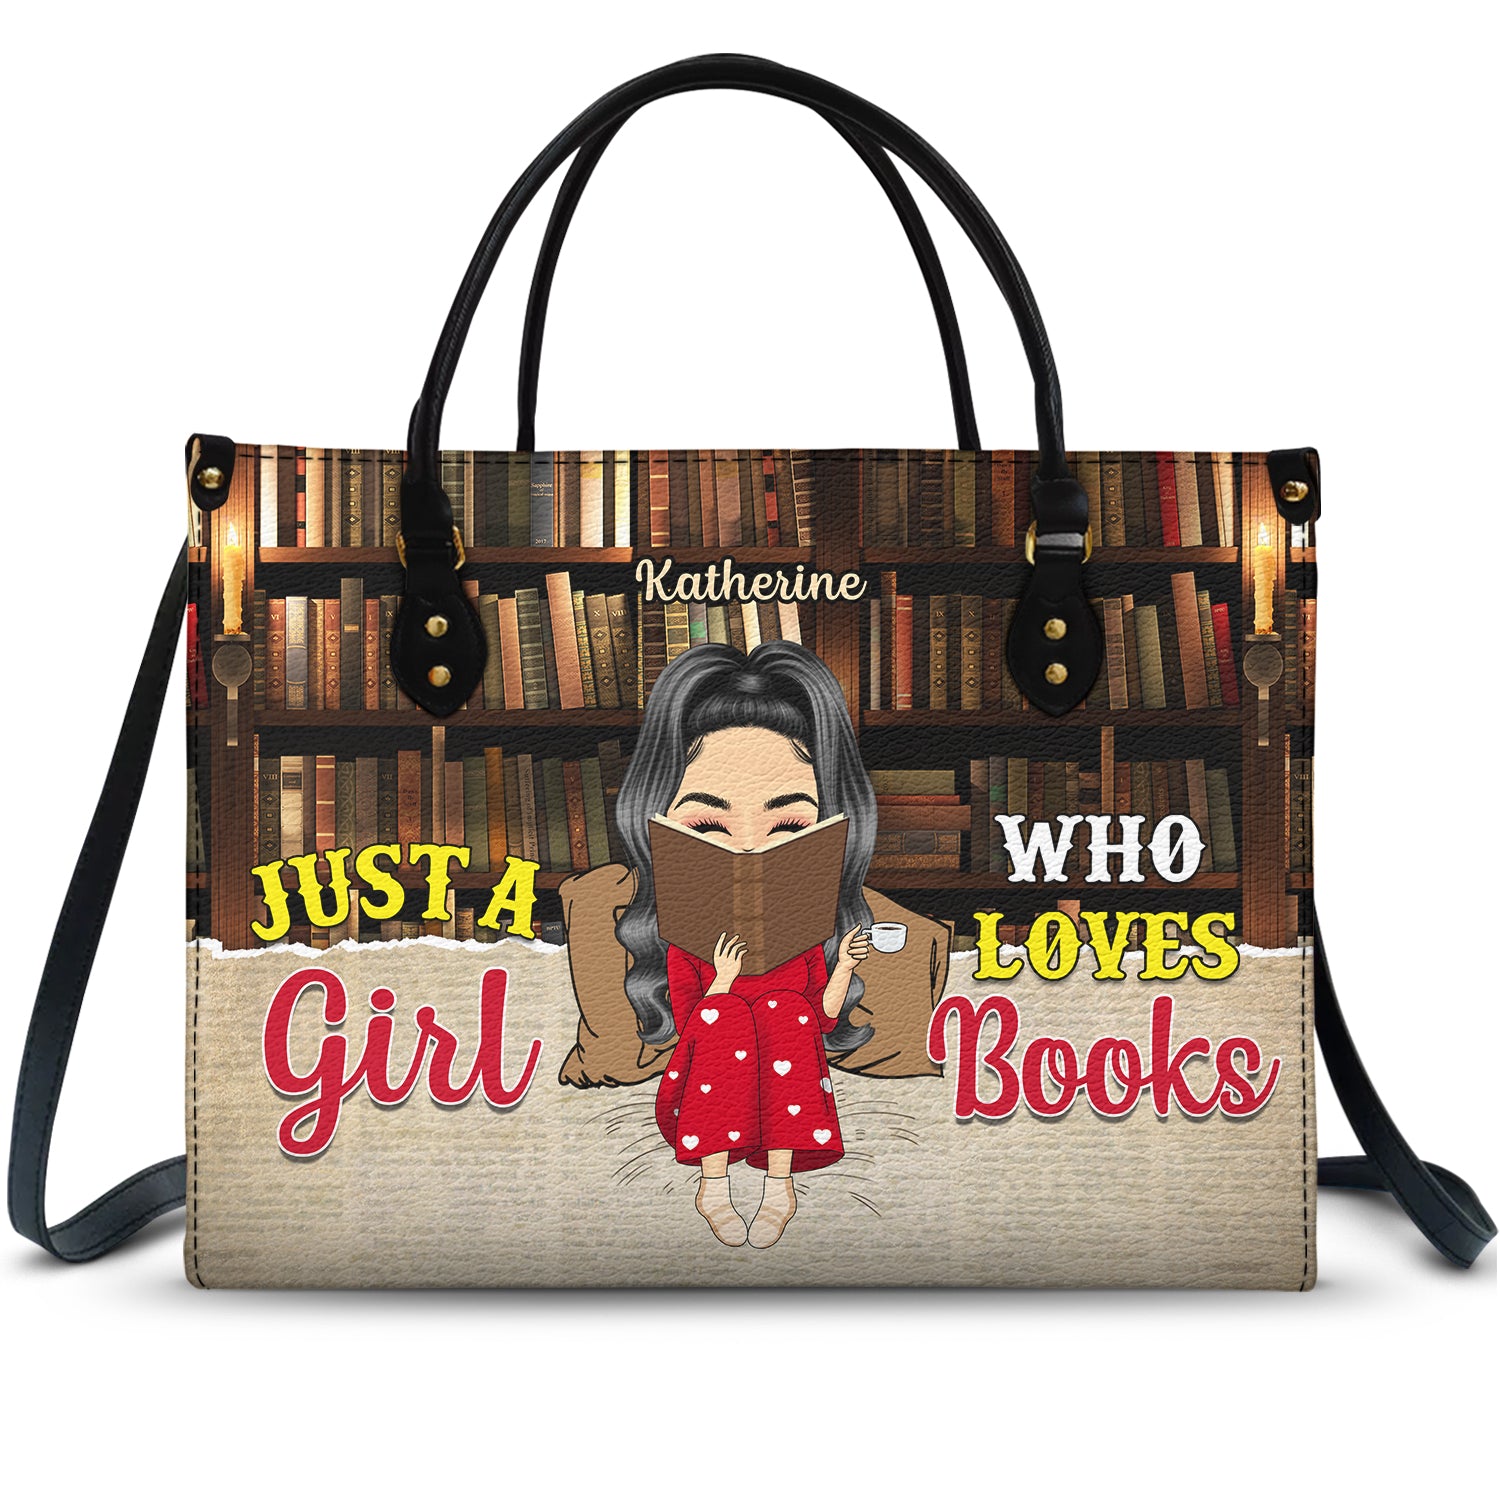 Just A Girl Who Loves Books - Gift For Books Lovers - Personalized Leather Bag